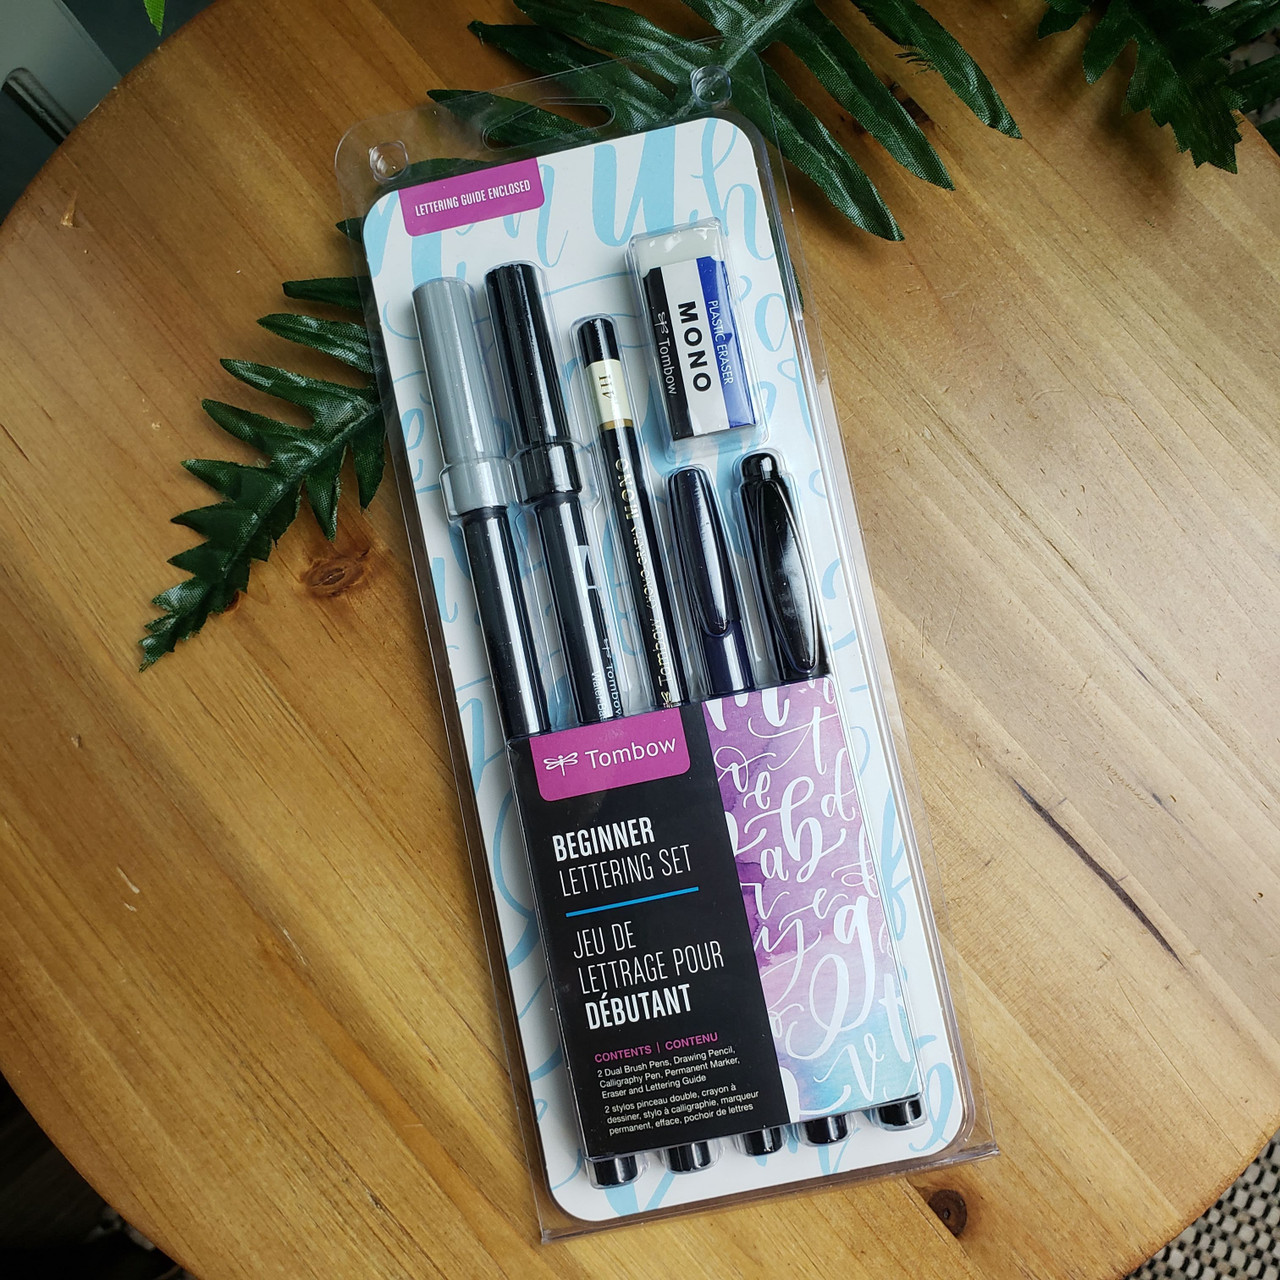 Tombow • Lettering set Advanced